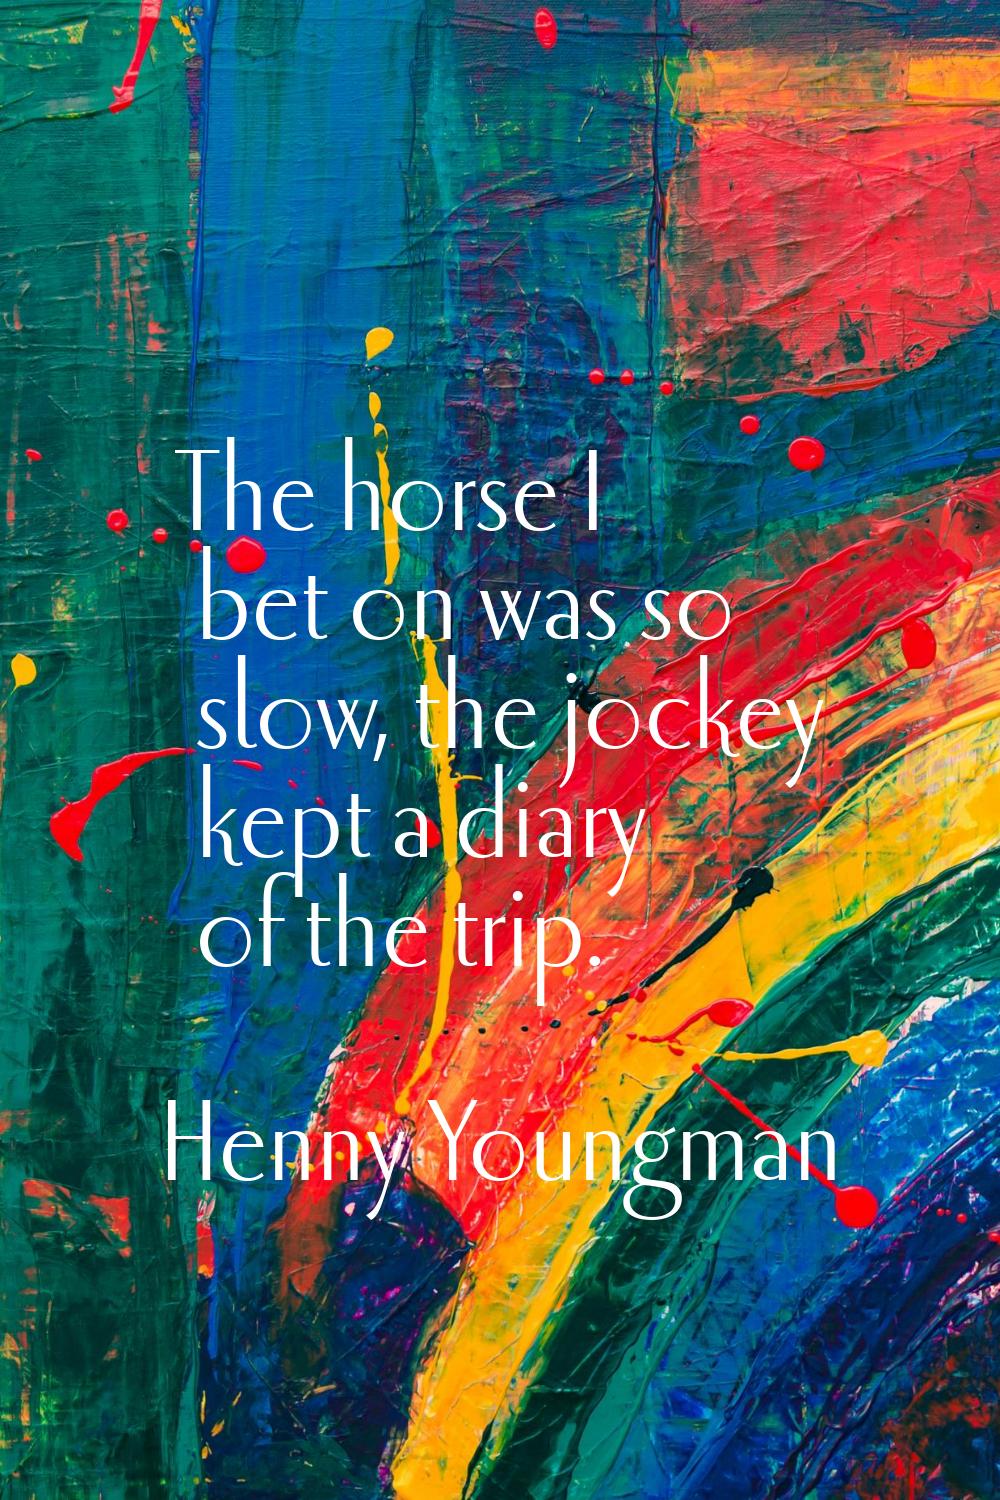 The horse I bet on was so slow, the jockey kept a diary of the trip.